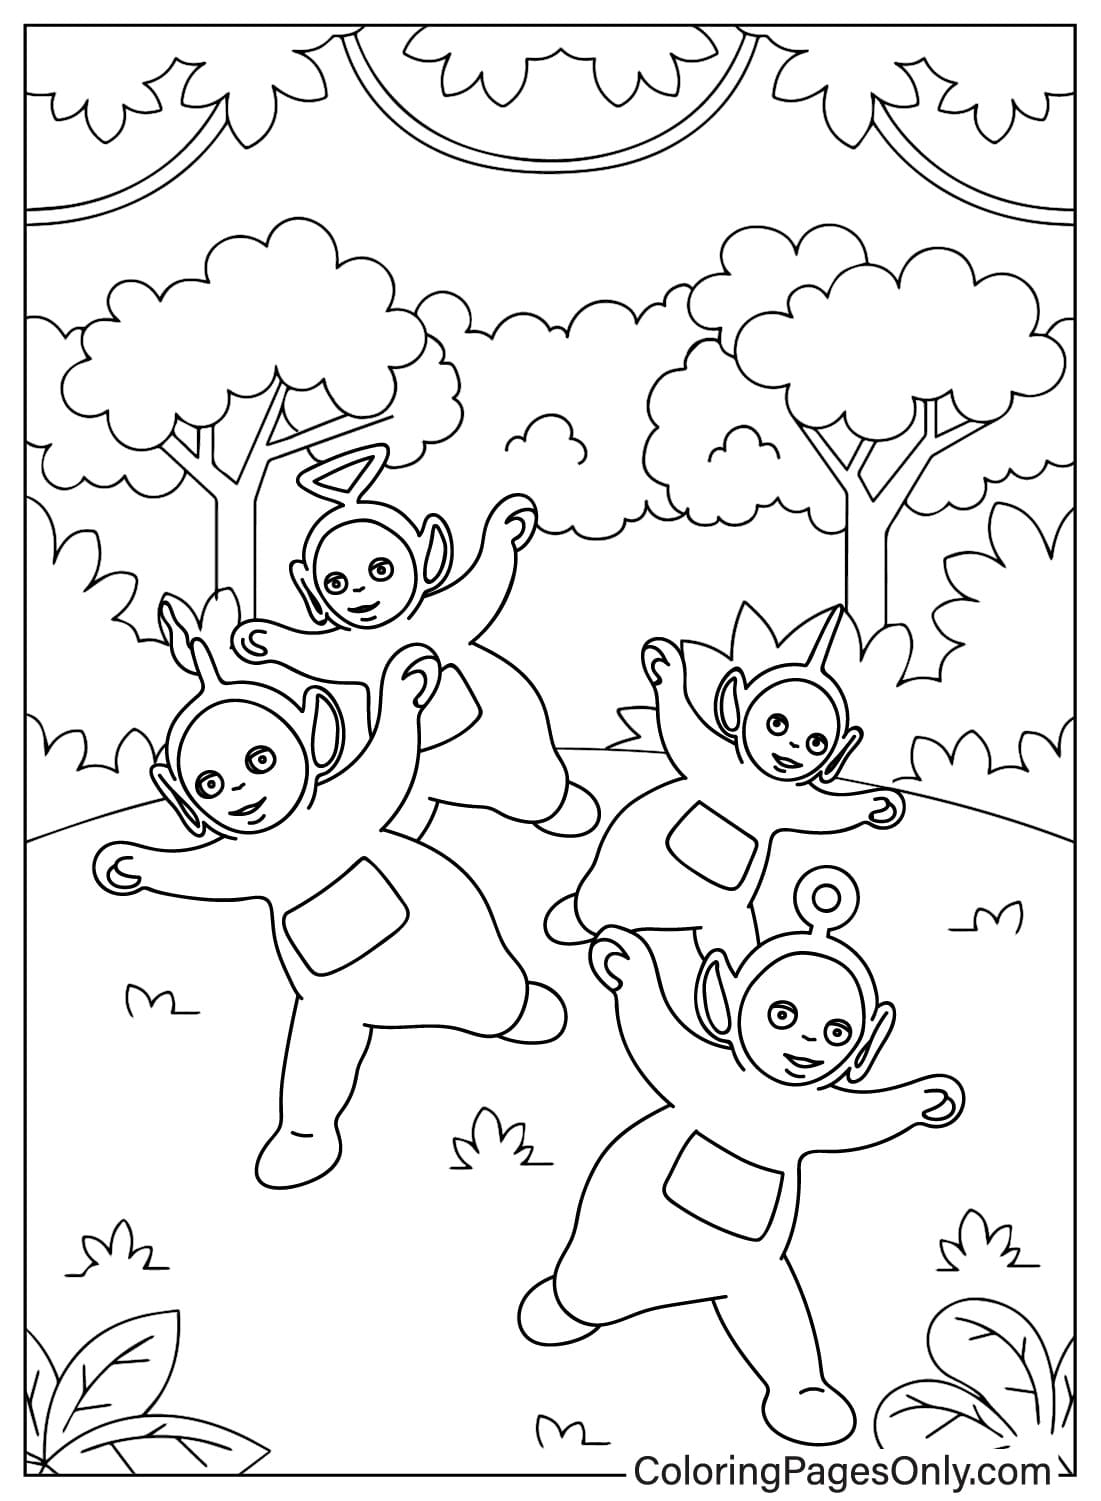 Teletubbies – WildBrain Coloring Page Images from Teletubbies - WildBrain